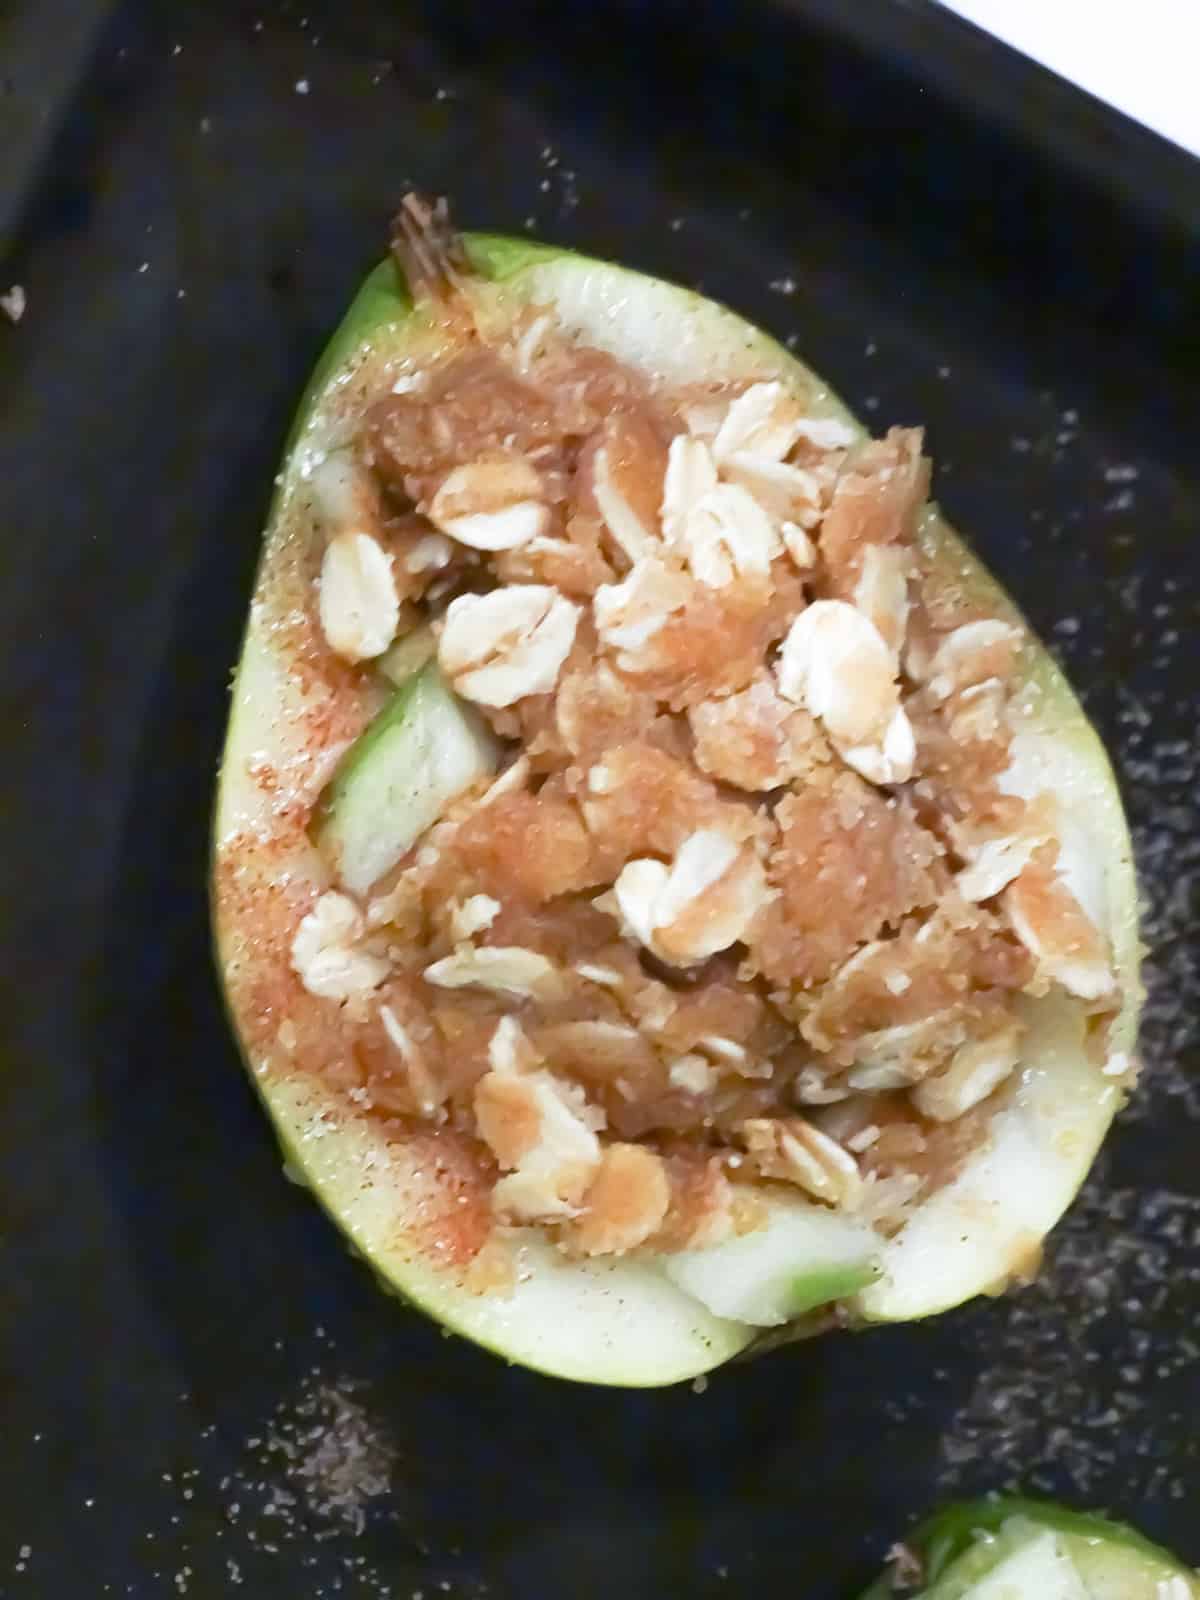 a pear full of apples, oatmeal and sugar filling